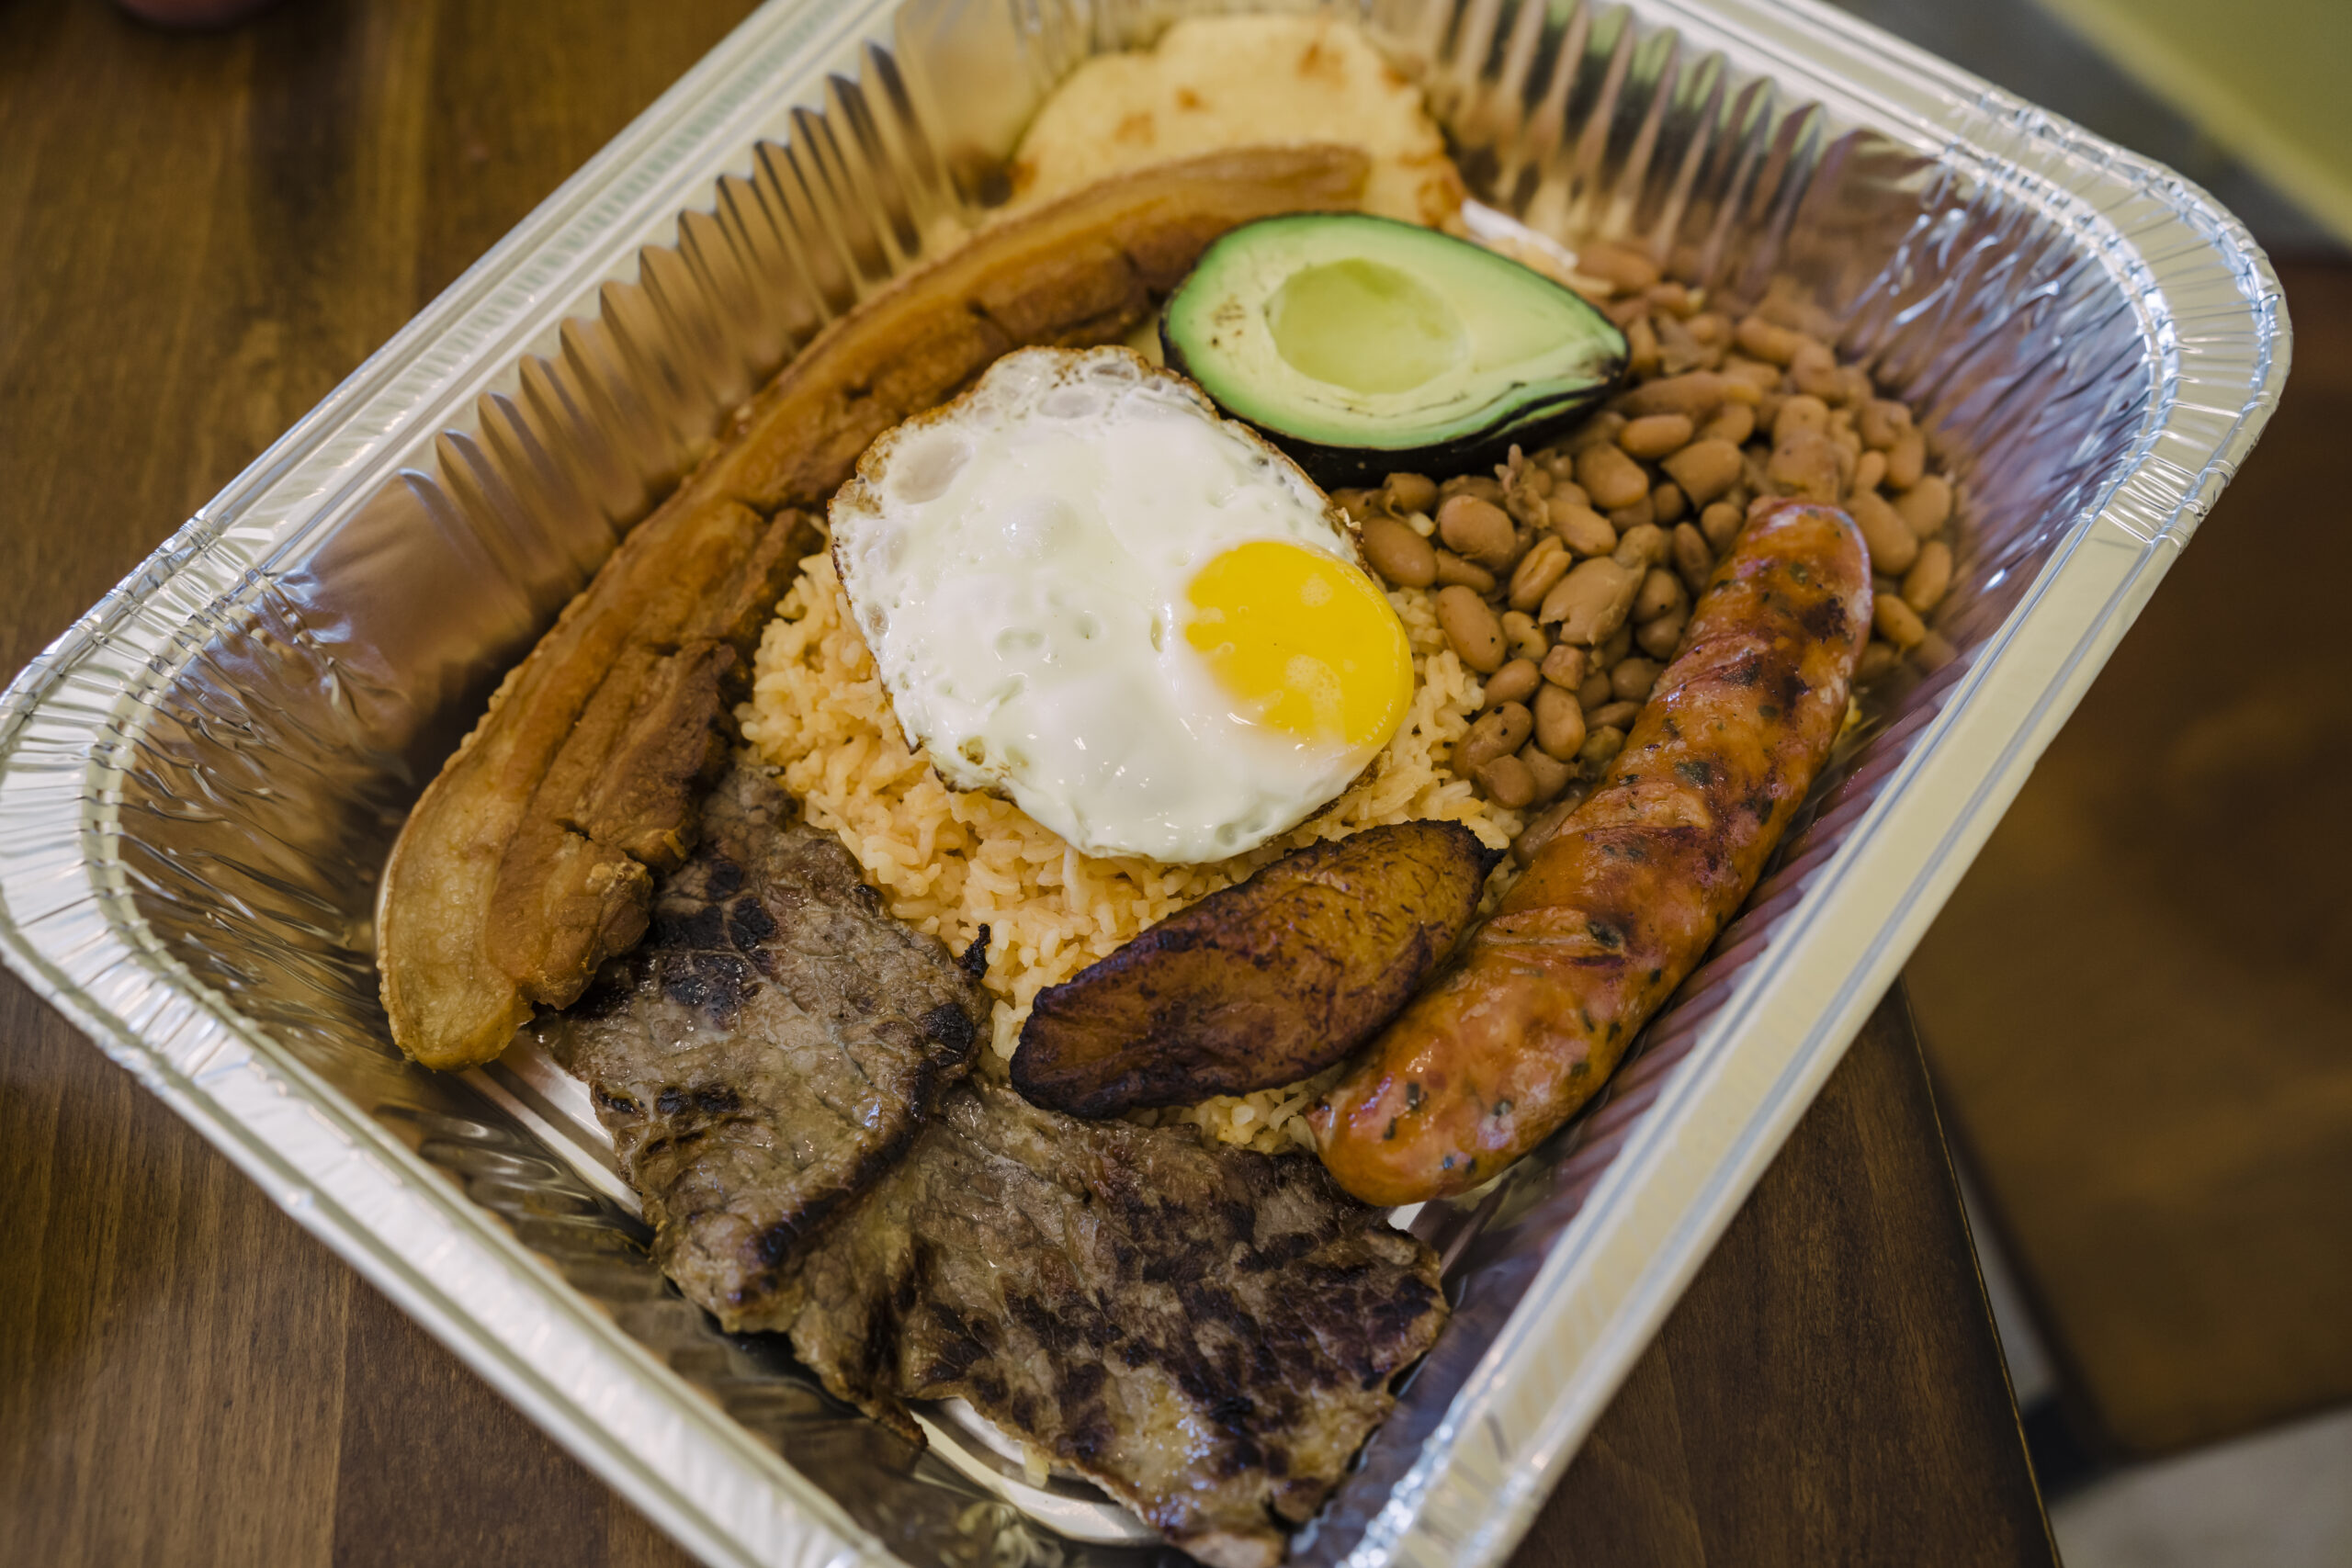 Bandeja Paisa, a traditional Colombian dish that includes: grilled steak, chicharrón, Colombian chorizo, a cheese arepa, fried plantains, rice, beans, egg and avocado.